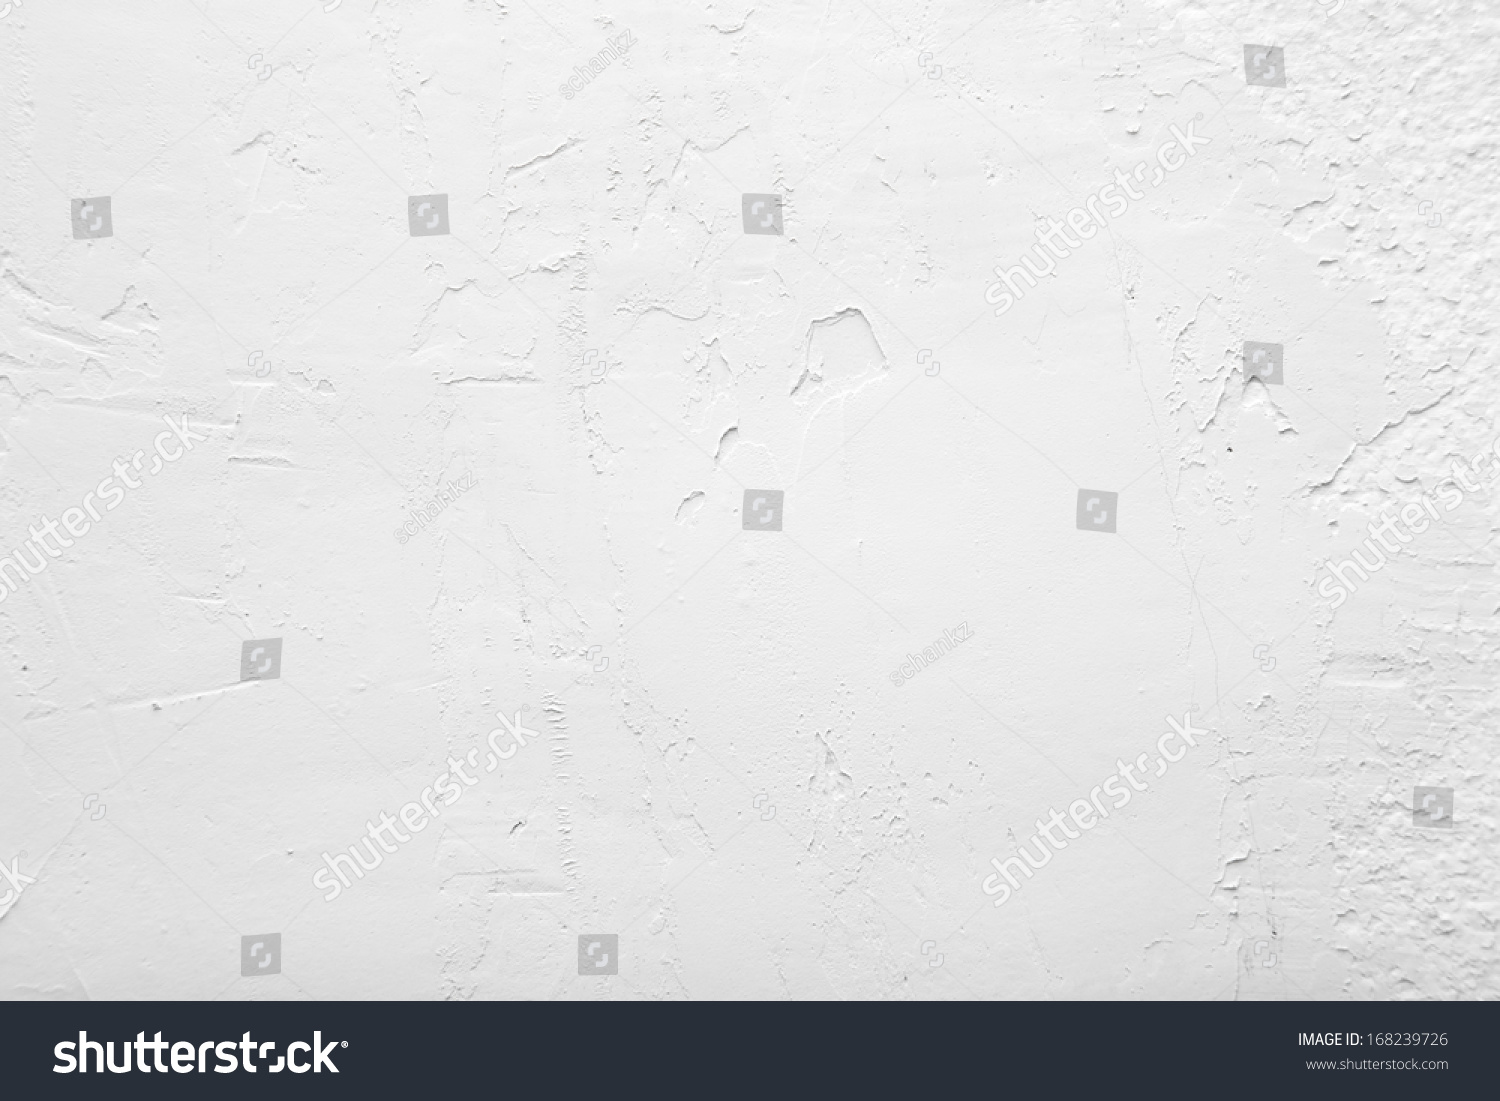 Background Of A White Wall Stock Photo 168239726 : Shutterstock